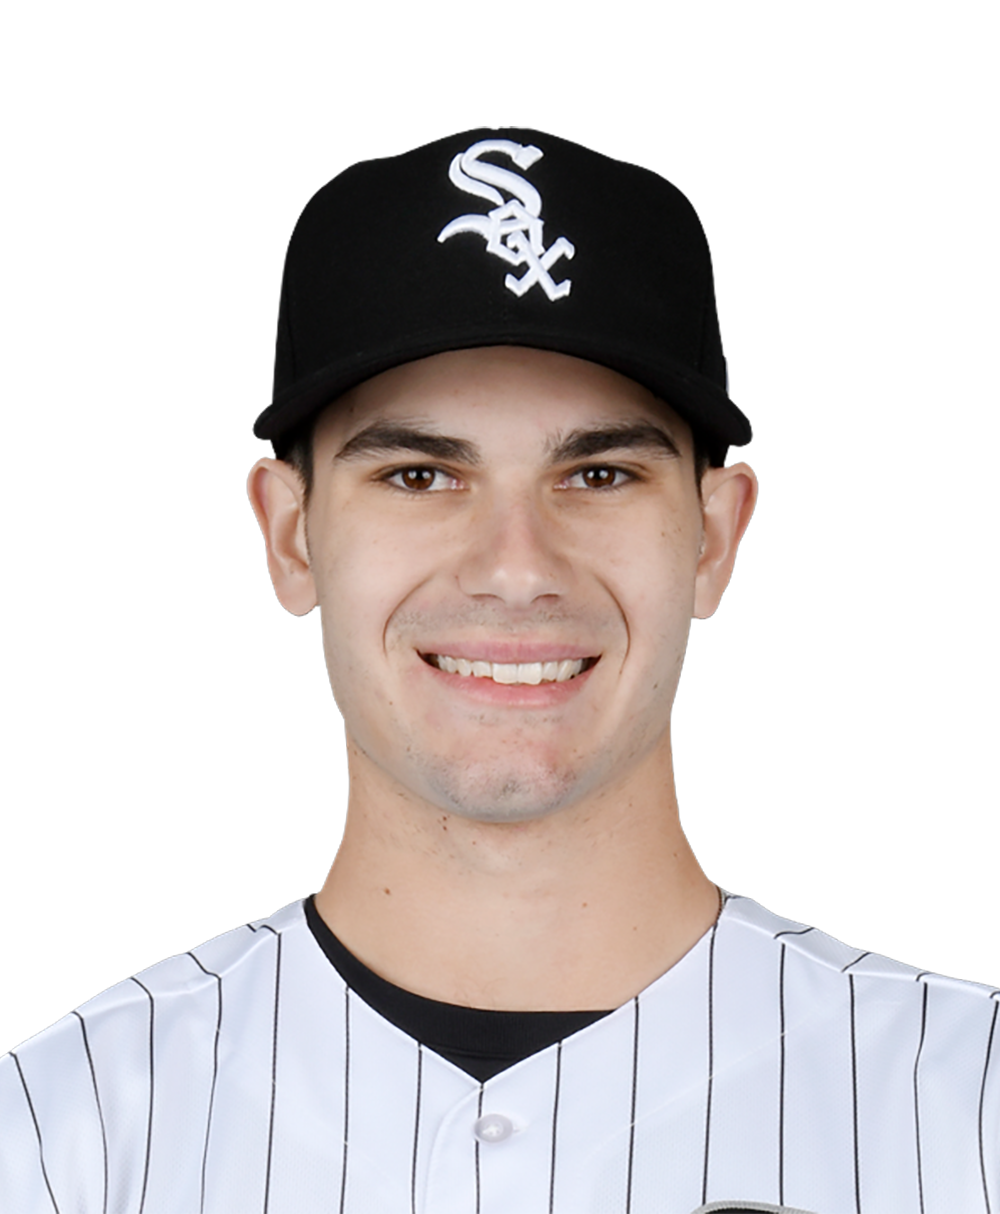 White Sox pitcher Dylan Cease rising near top with elite stuff